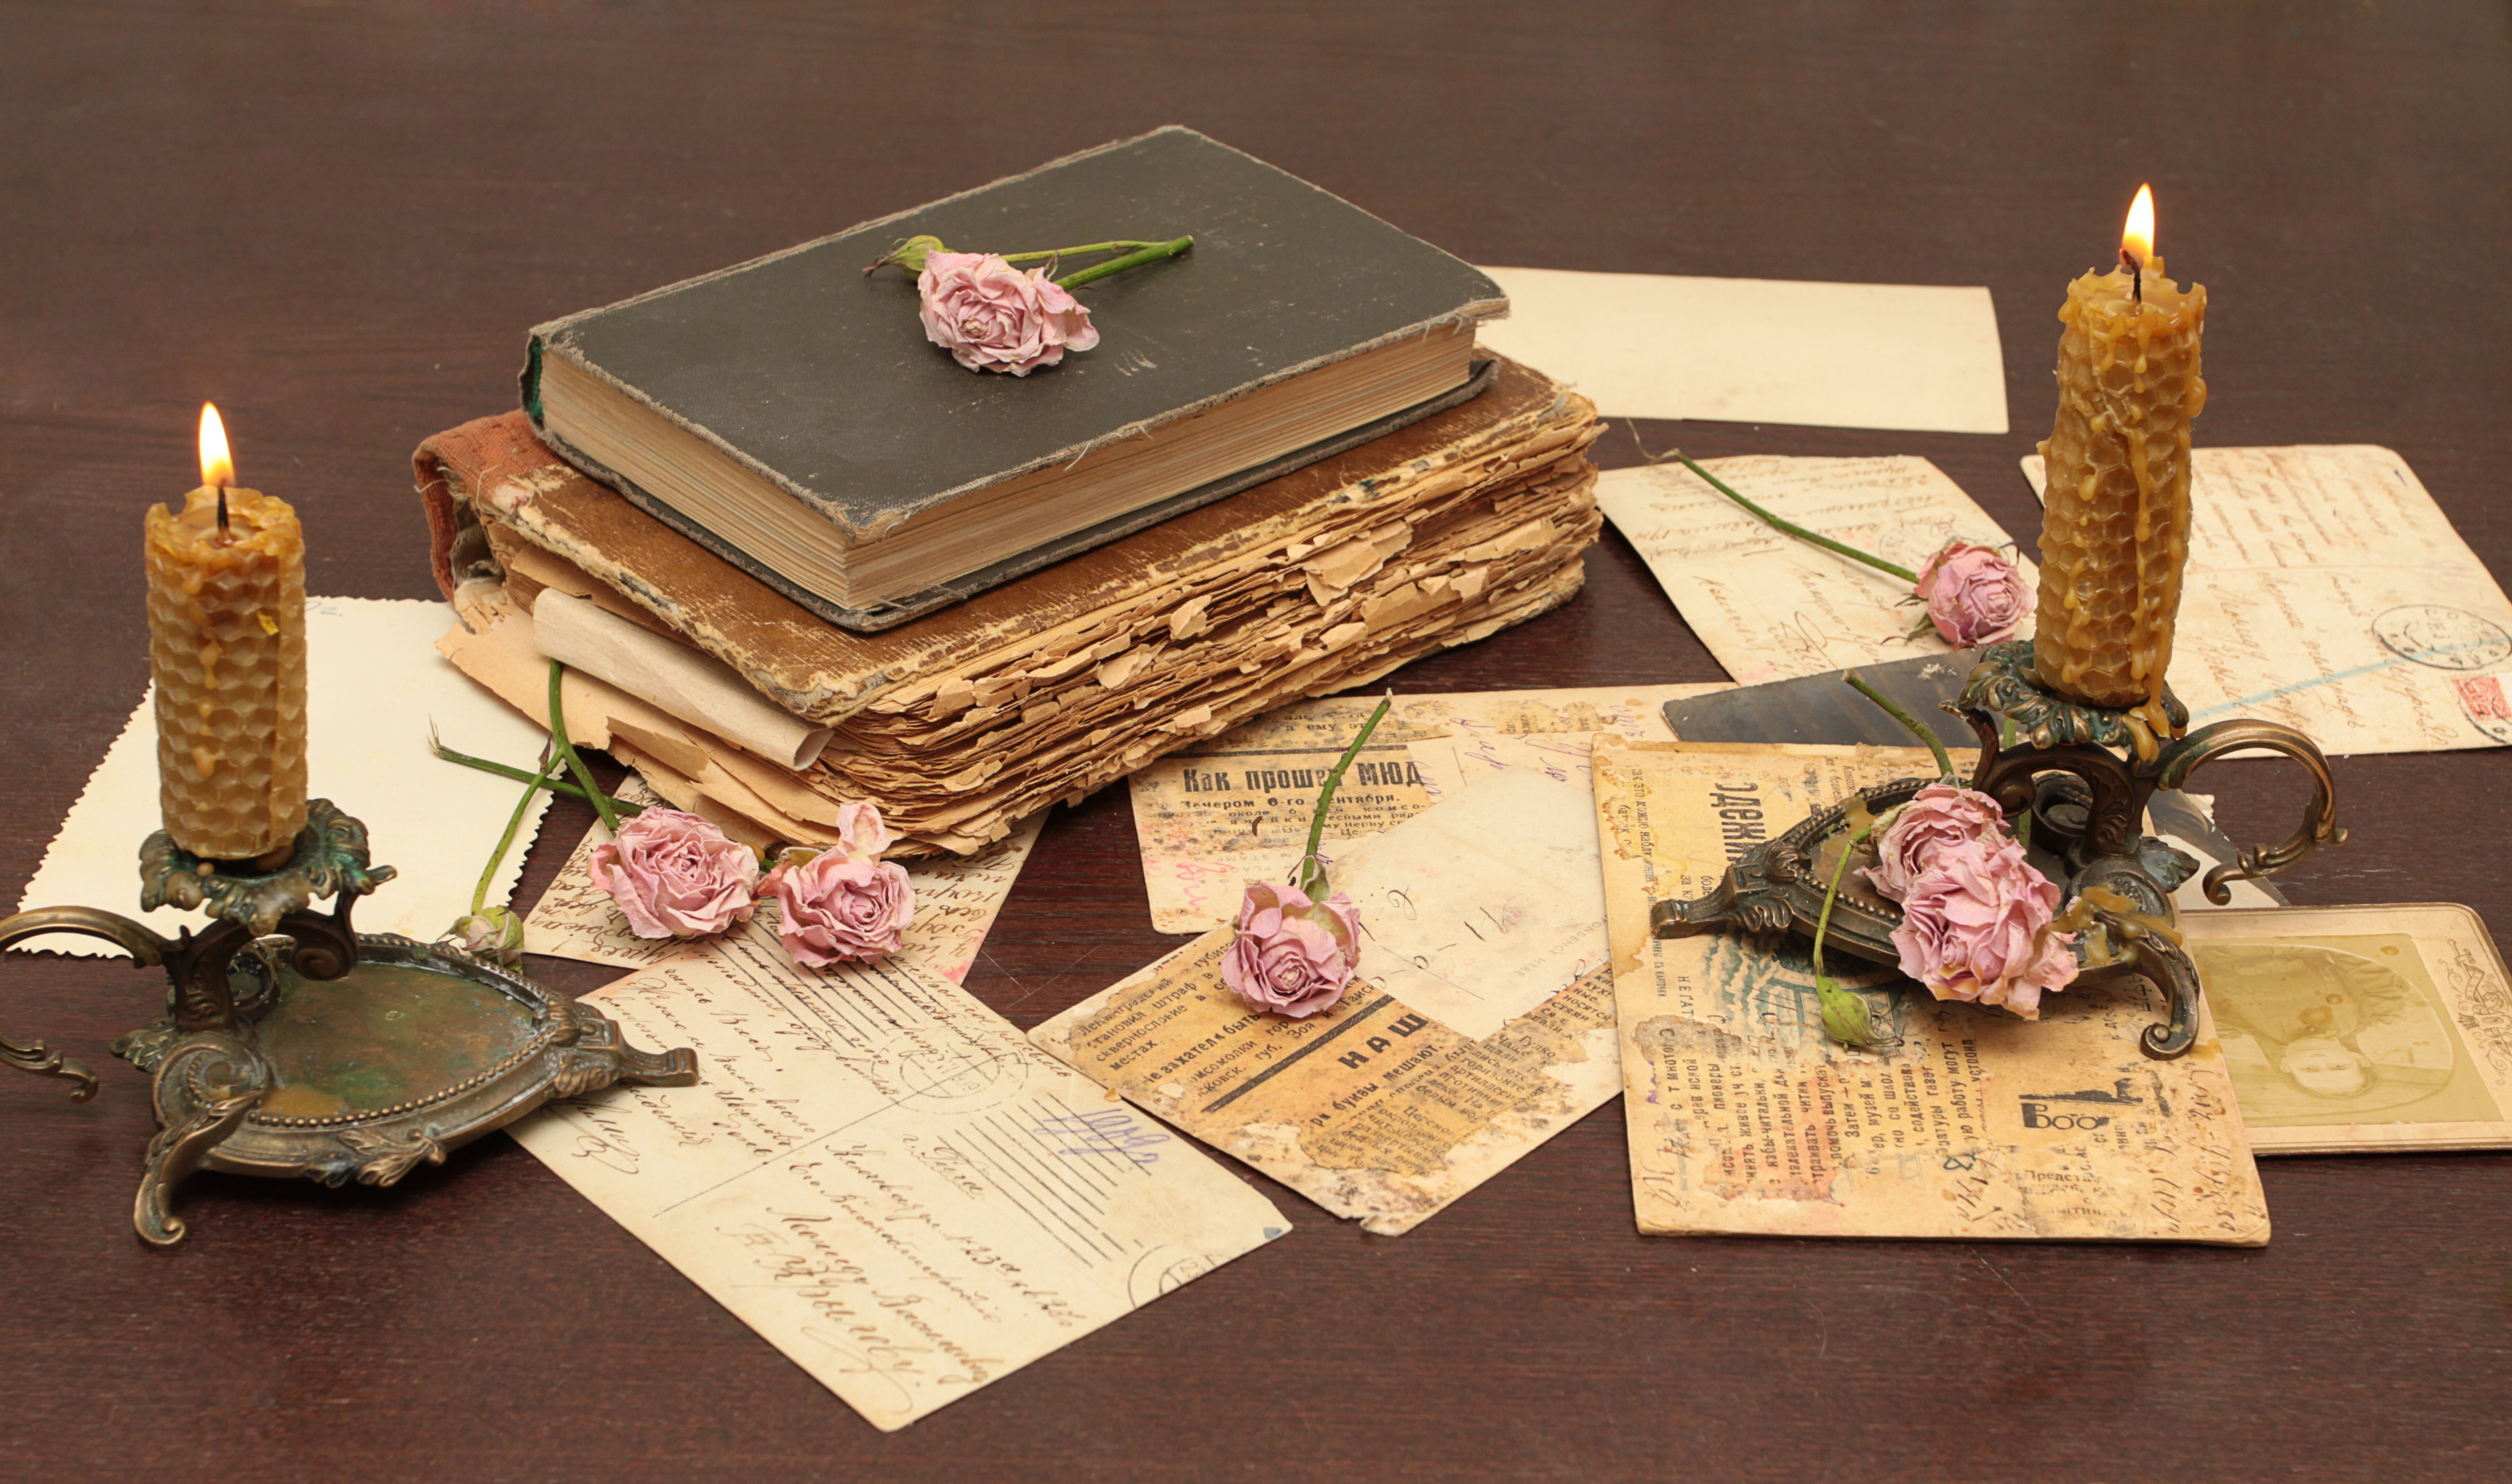 miscellaneous, old, vintage, miscellanea, books, flowers, roses, candles, postcards, table, paper, letters, candlesticks Free Stock Photo